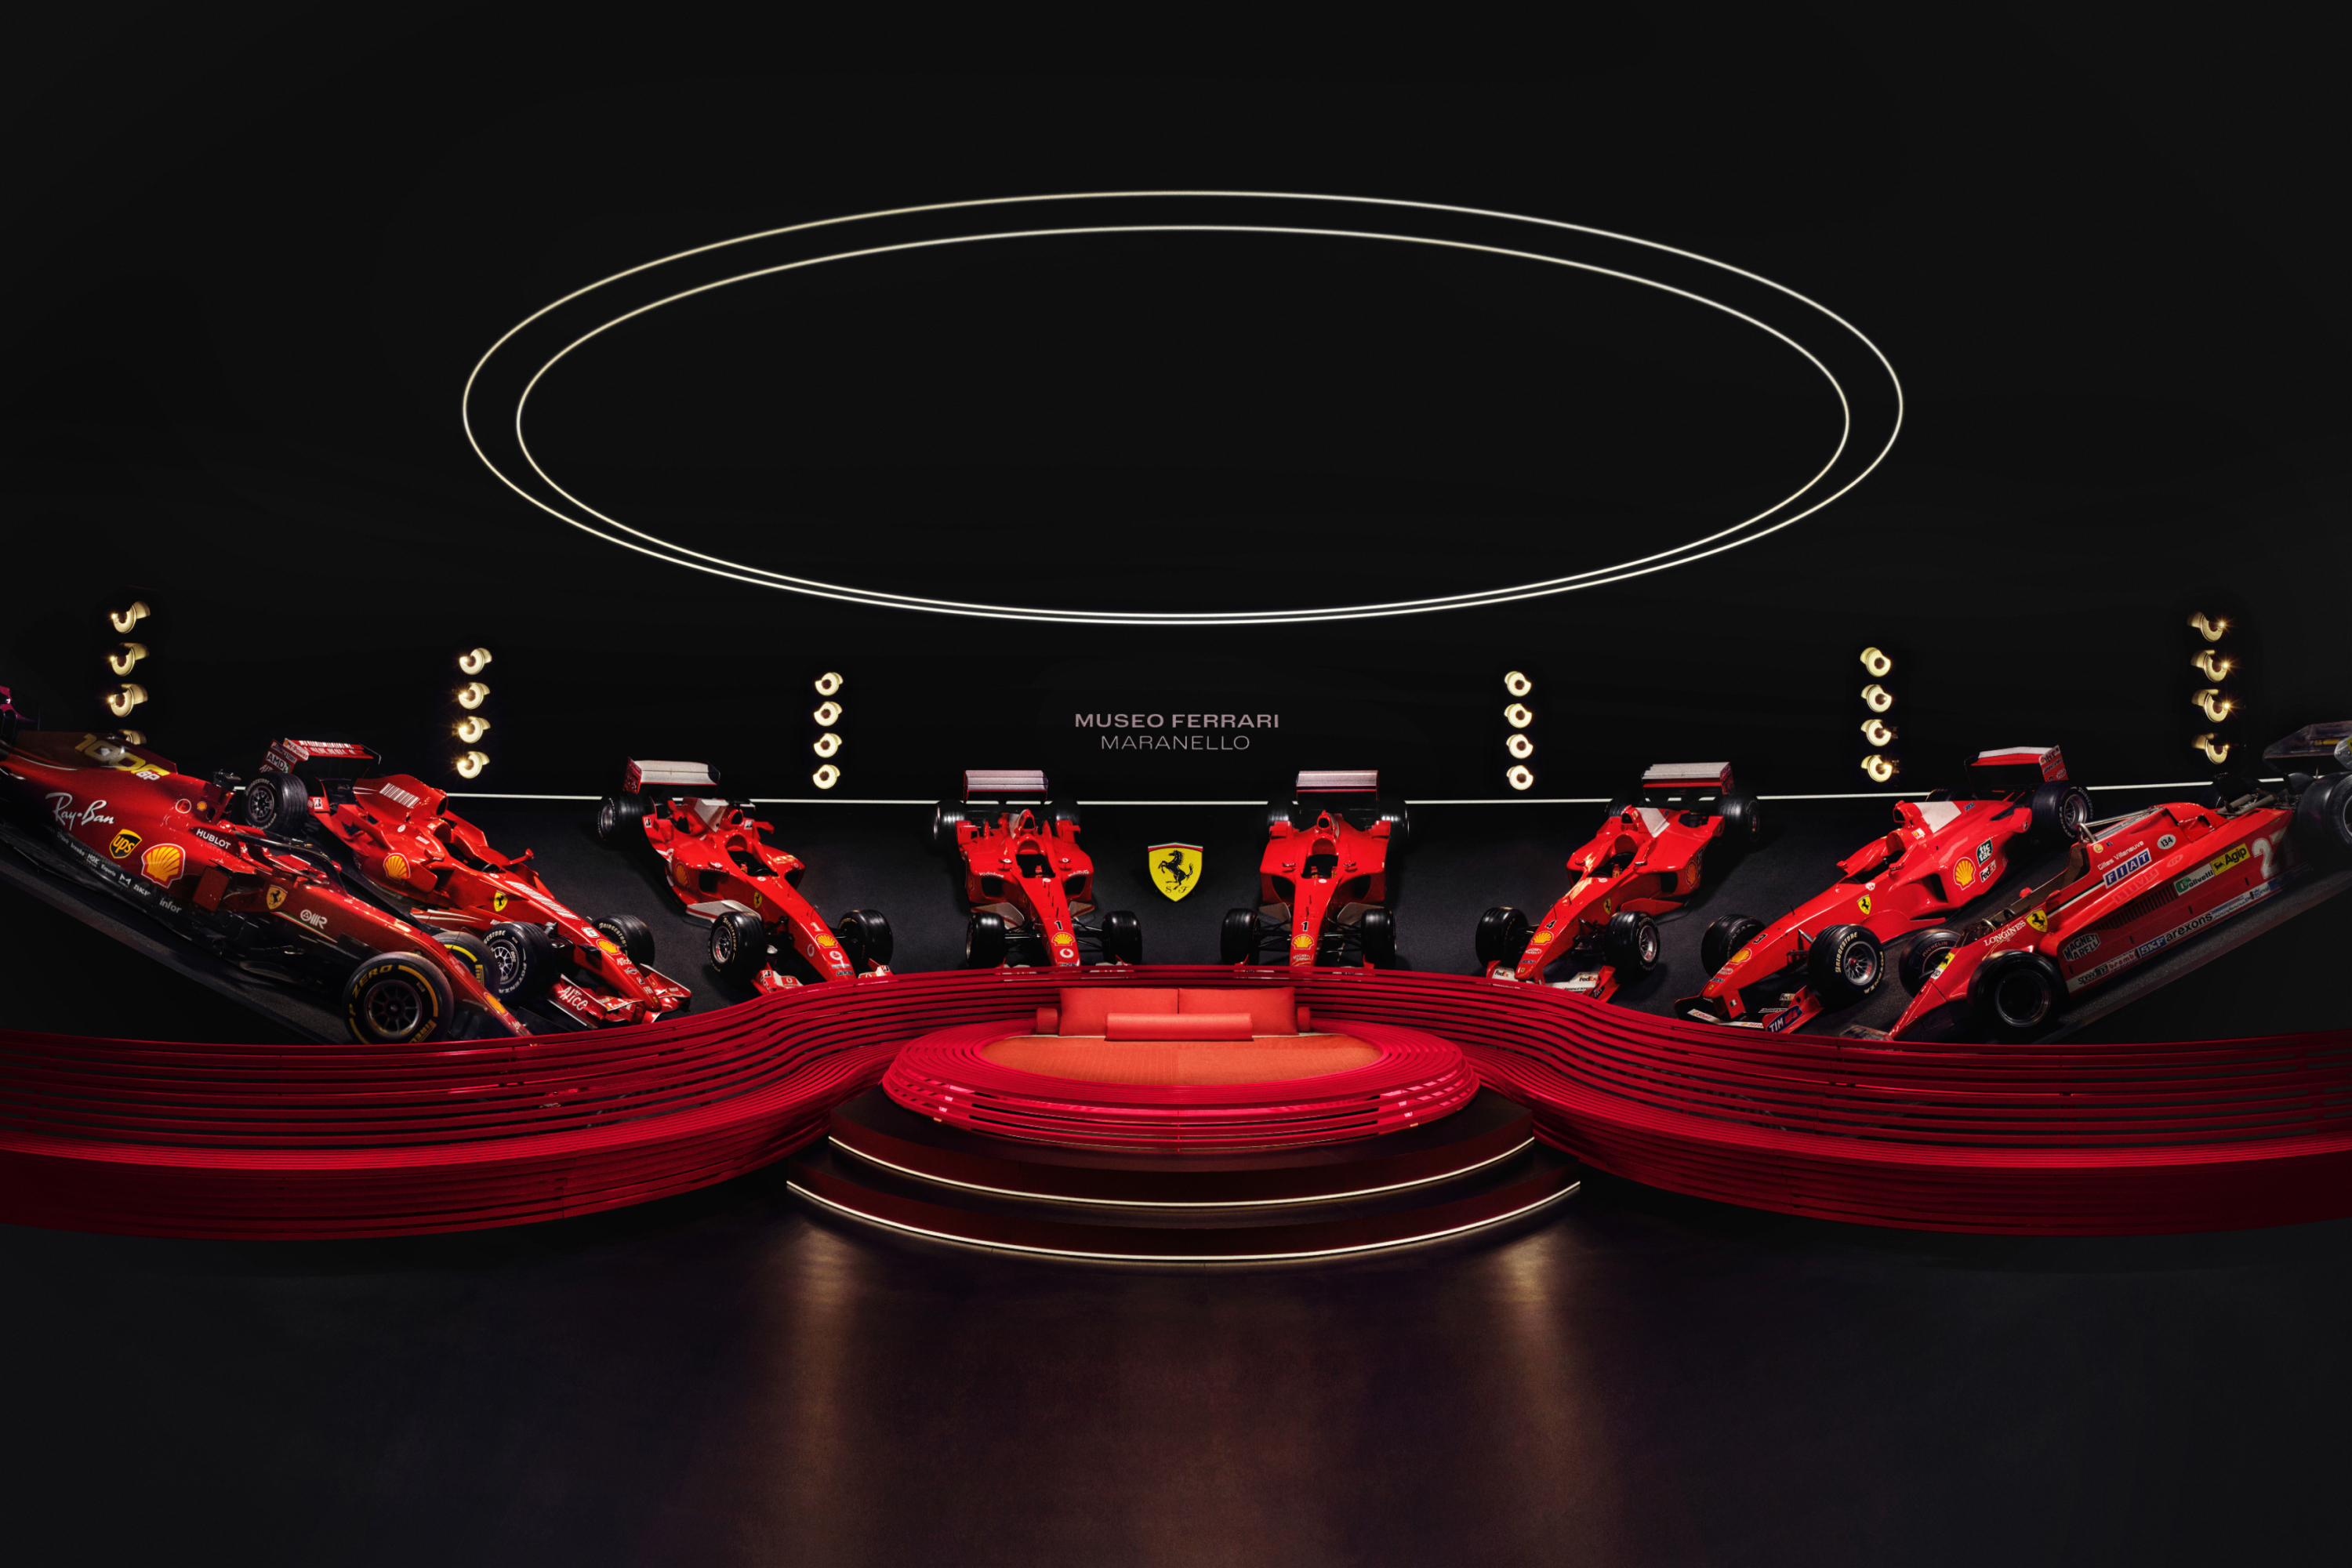 Eight red Ferrari cars on display in a semi circle, framing a circular red bed with a orb light above it. 